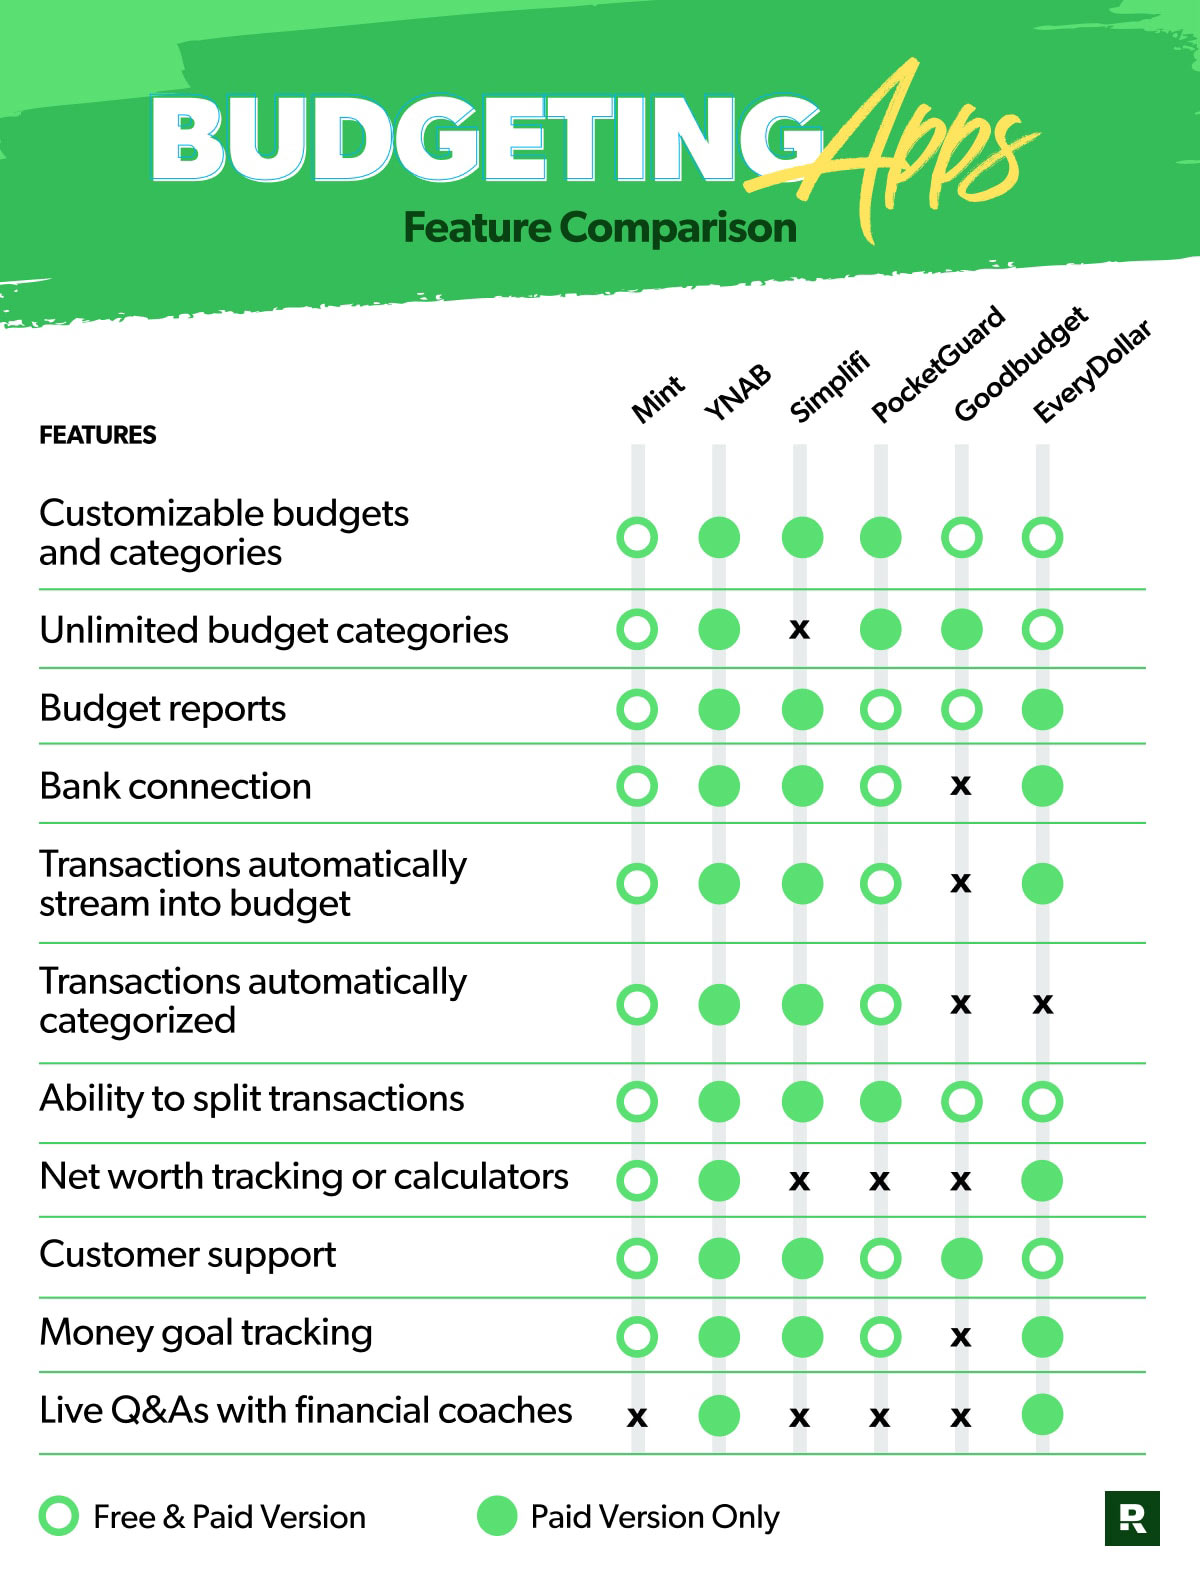 budgeting apps comparison